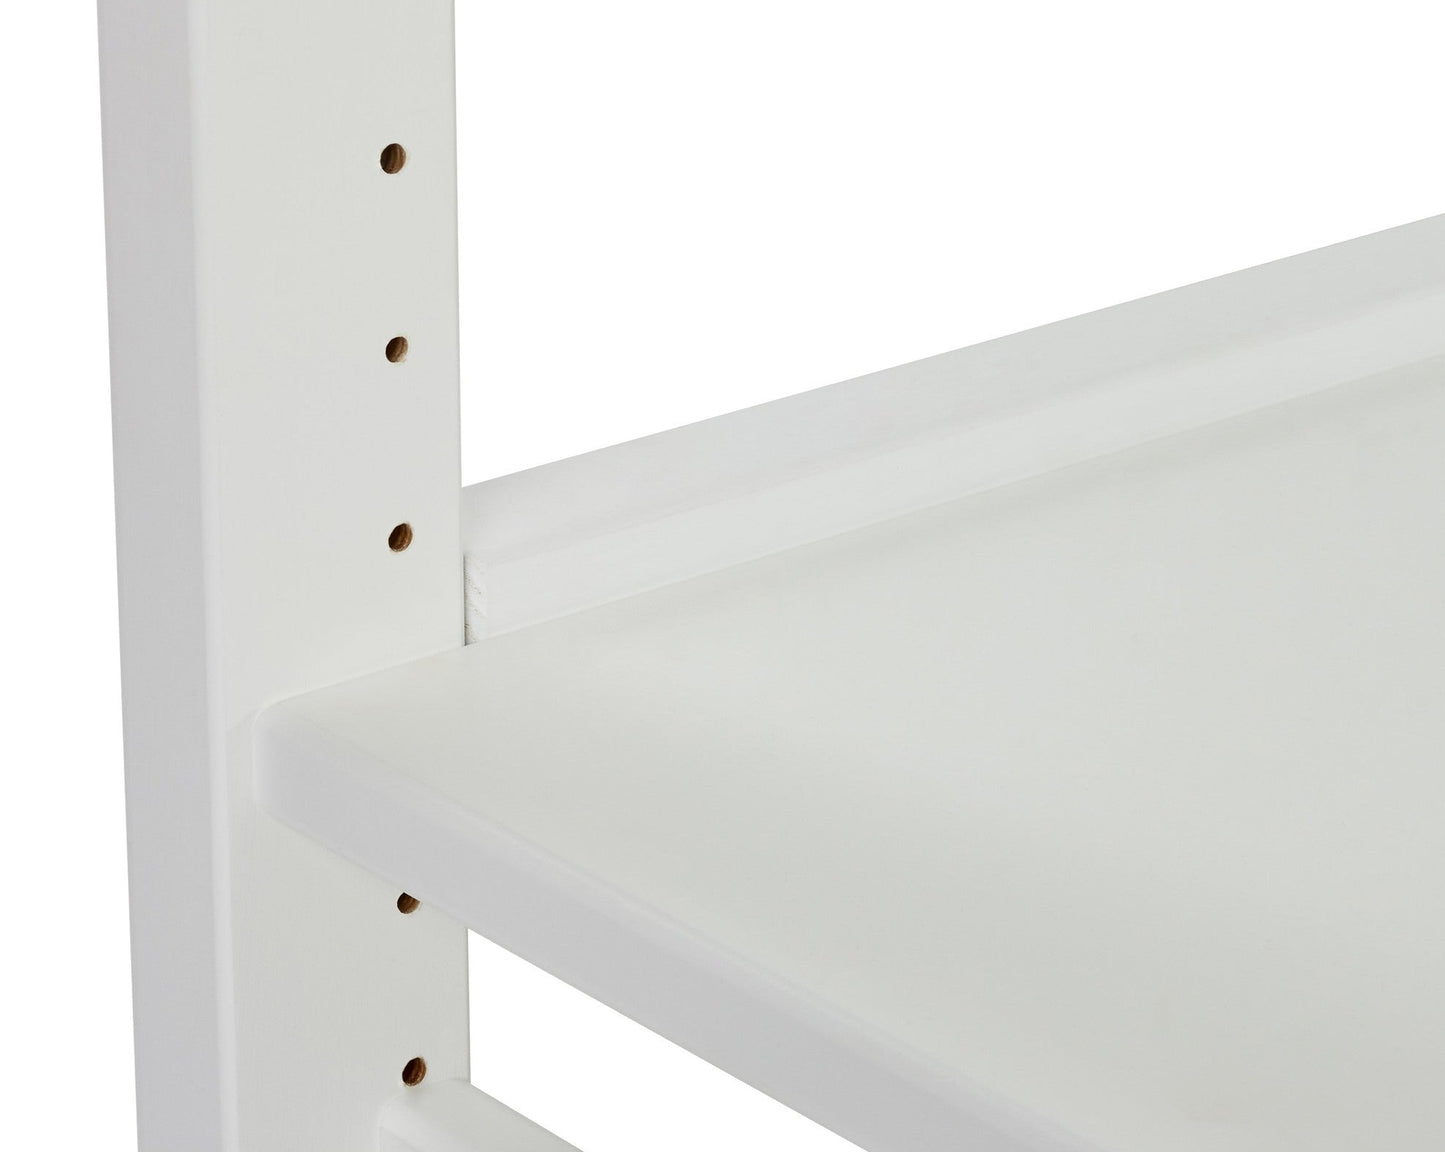 Storey - Shelf with 3 sections, 14 shelves and desk - 80 cm - White